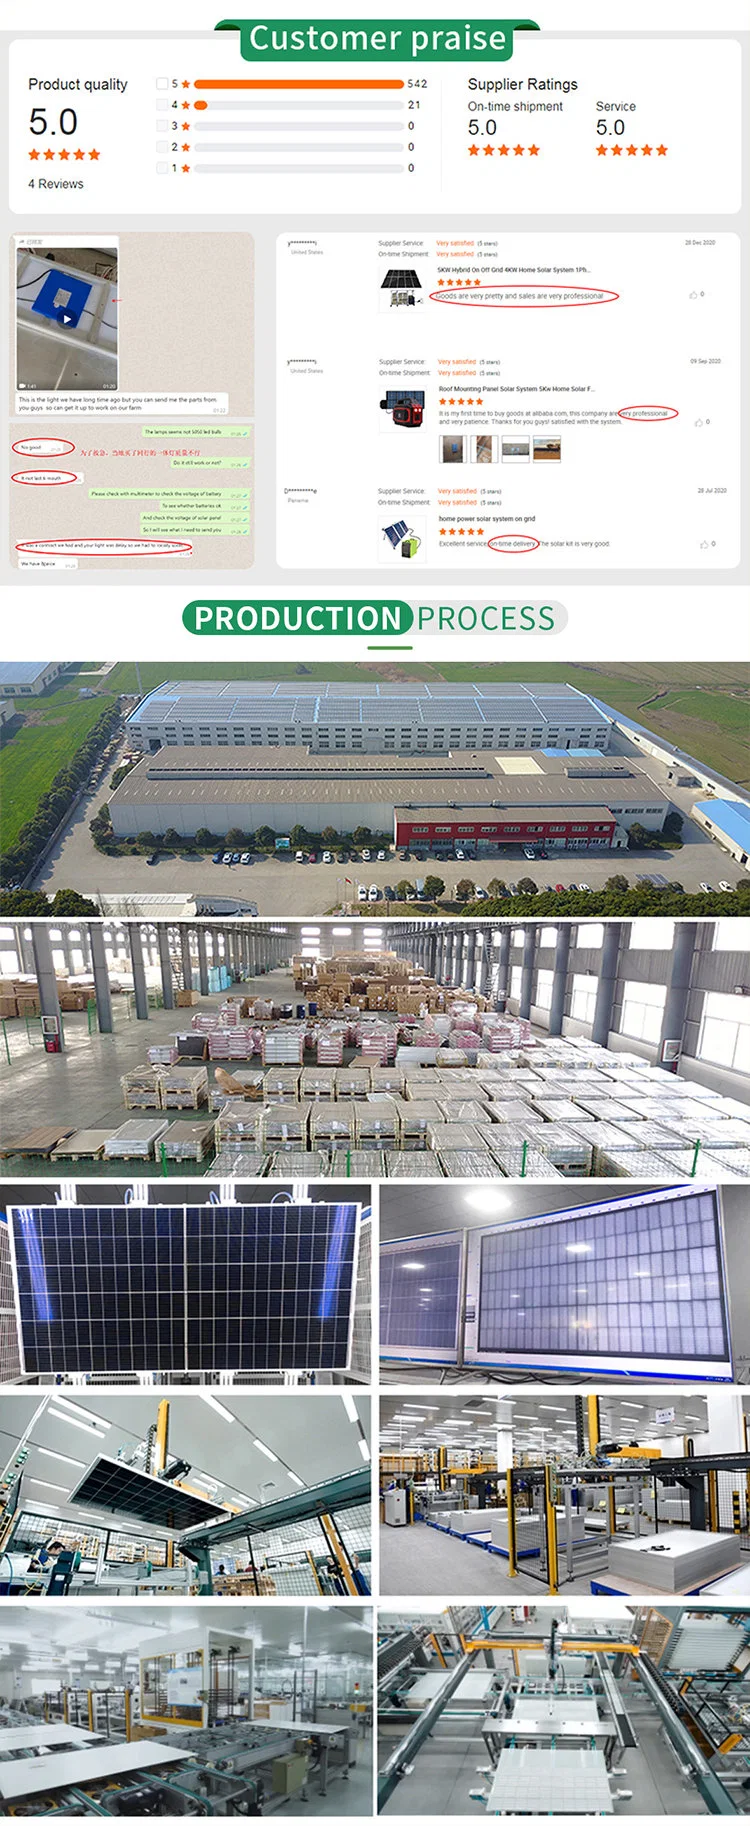 Private Label 1000W Power Station Power 15 to 20 Kw 10 AMP Solar Panel Commercial 10kw off Grid Portable Solar Generator